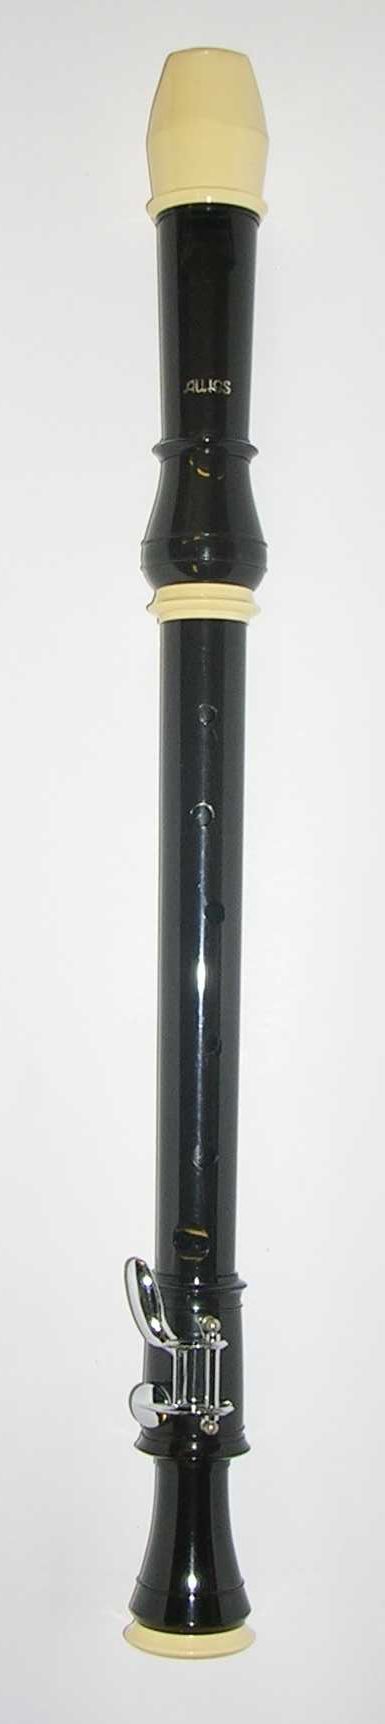 The old model Aulos 311 Tenor Recorder.